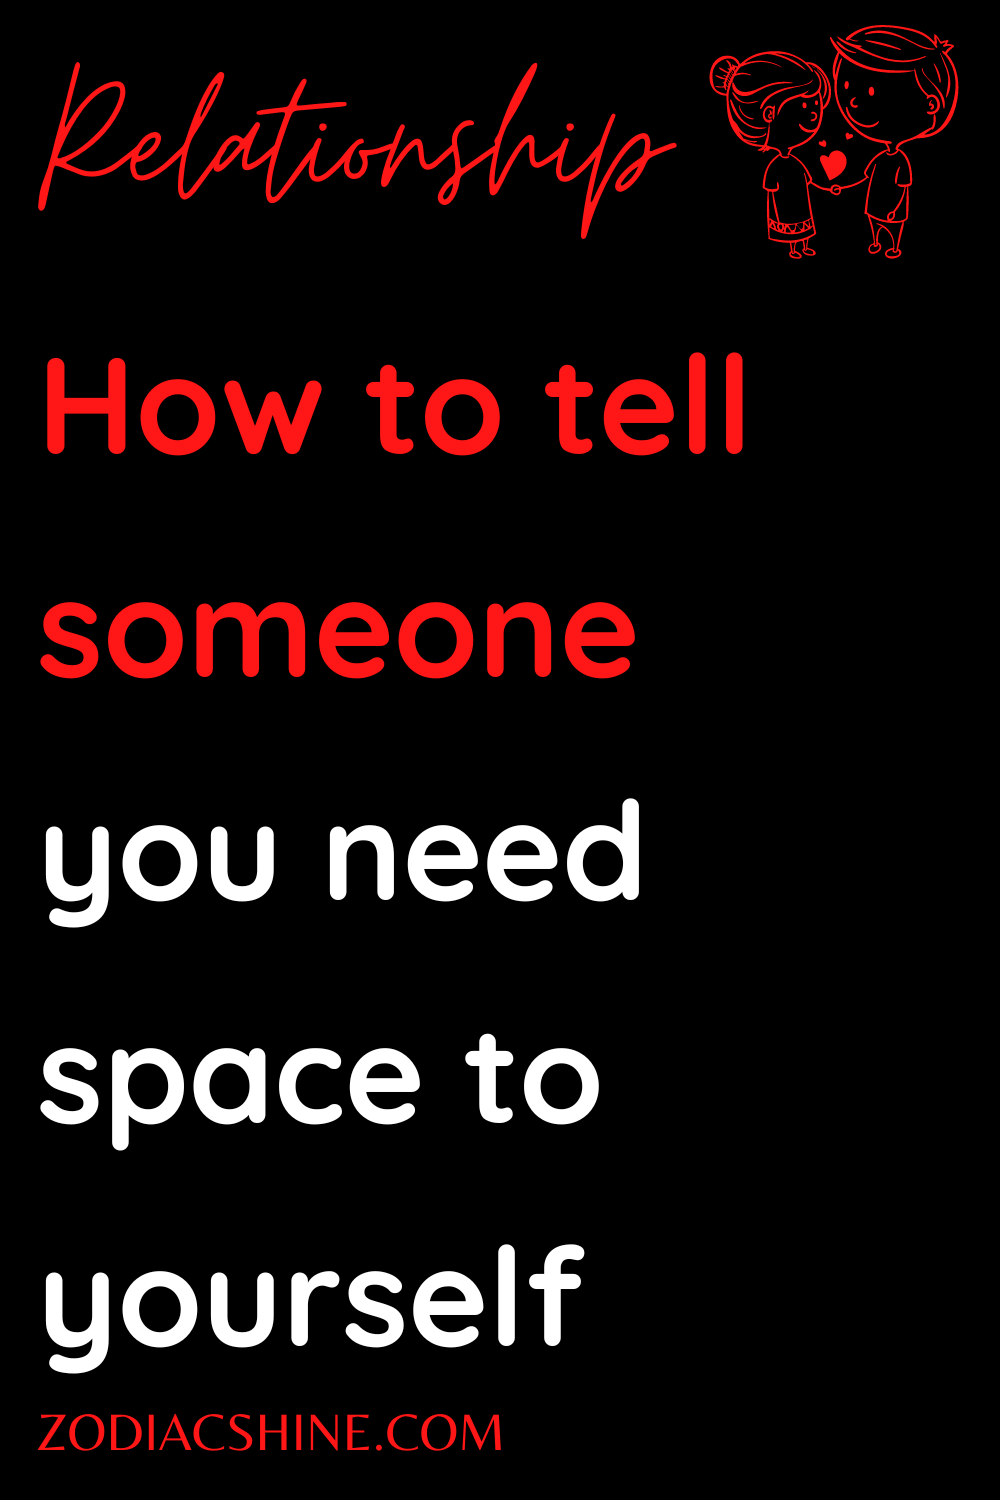 How to tell someone you need space to yourself